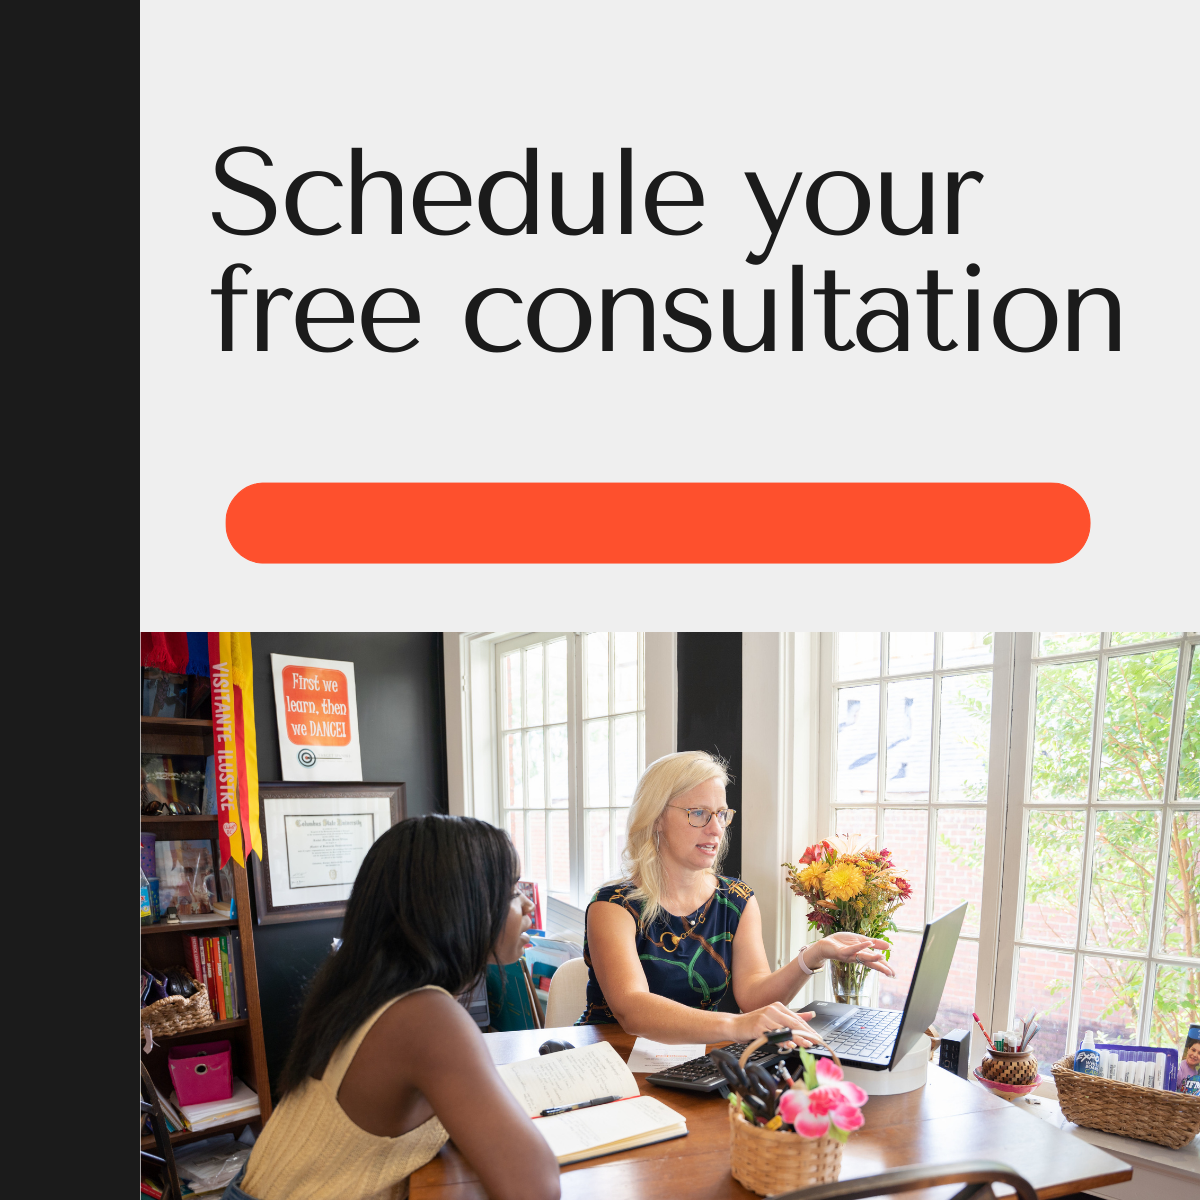 Schedule your free consultation here